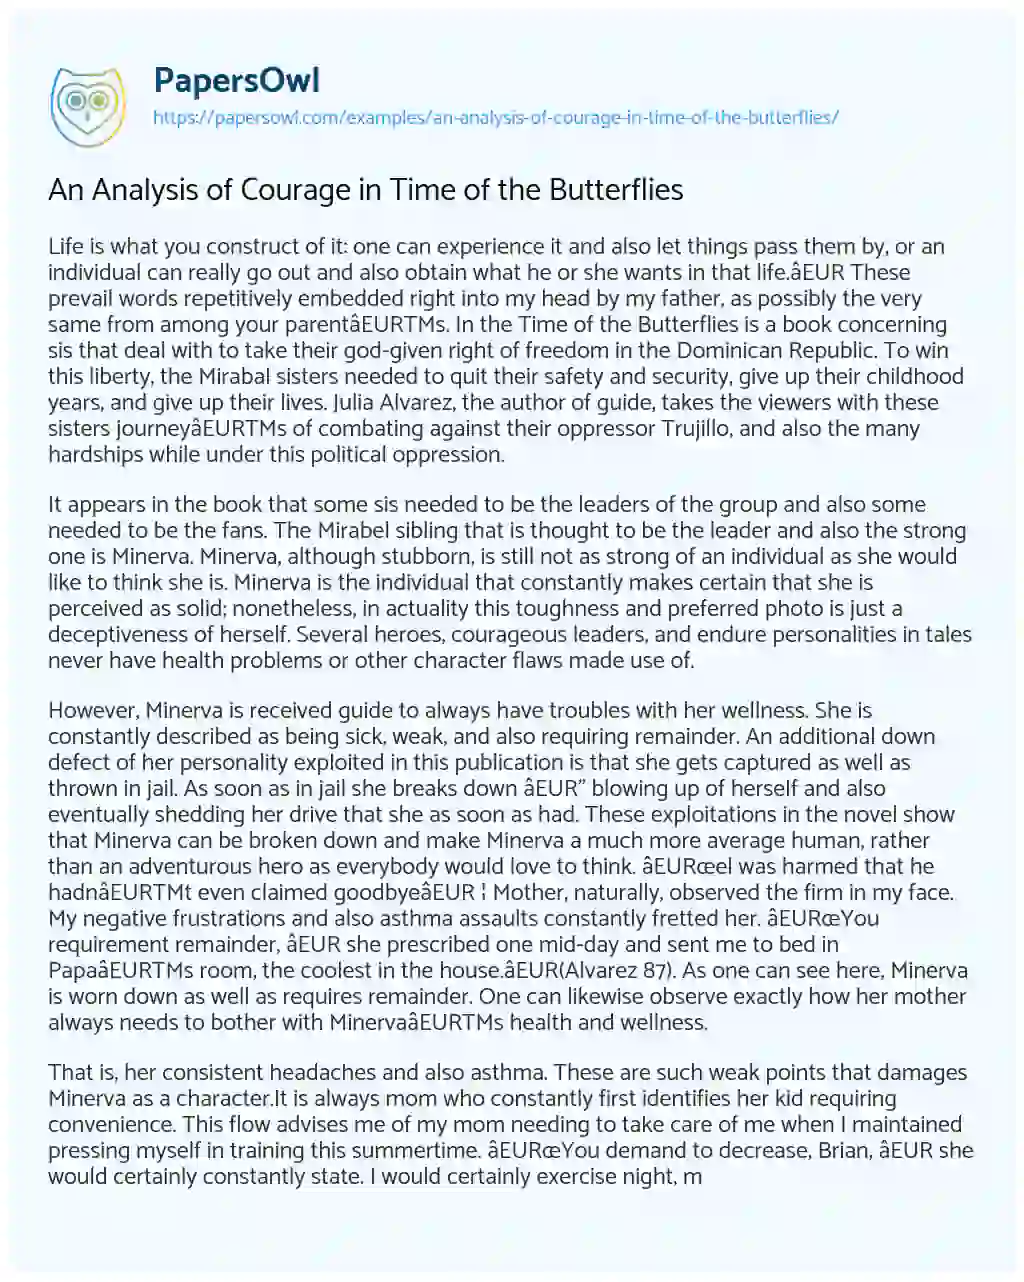 Essay on An Analysis of Courage in Time of the Butterflies